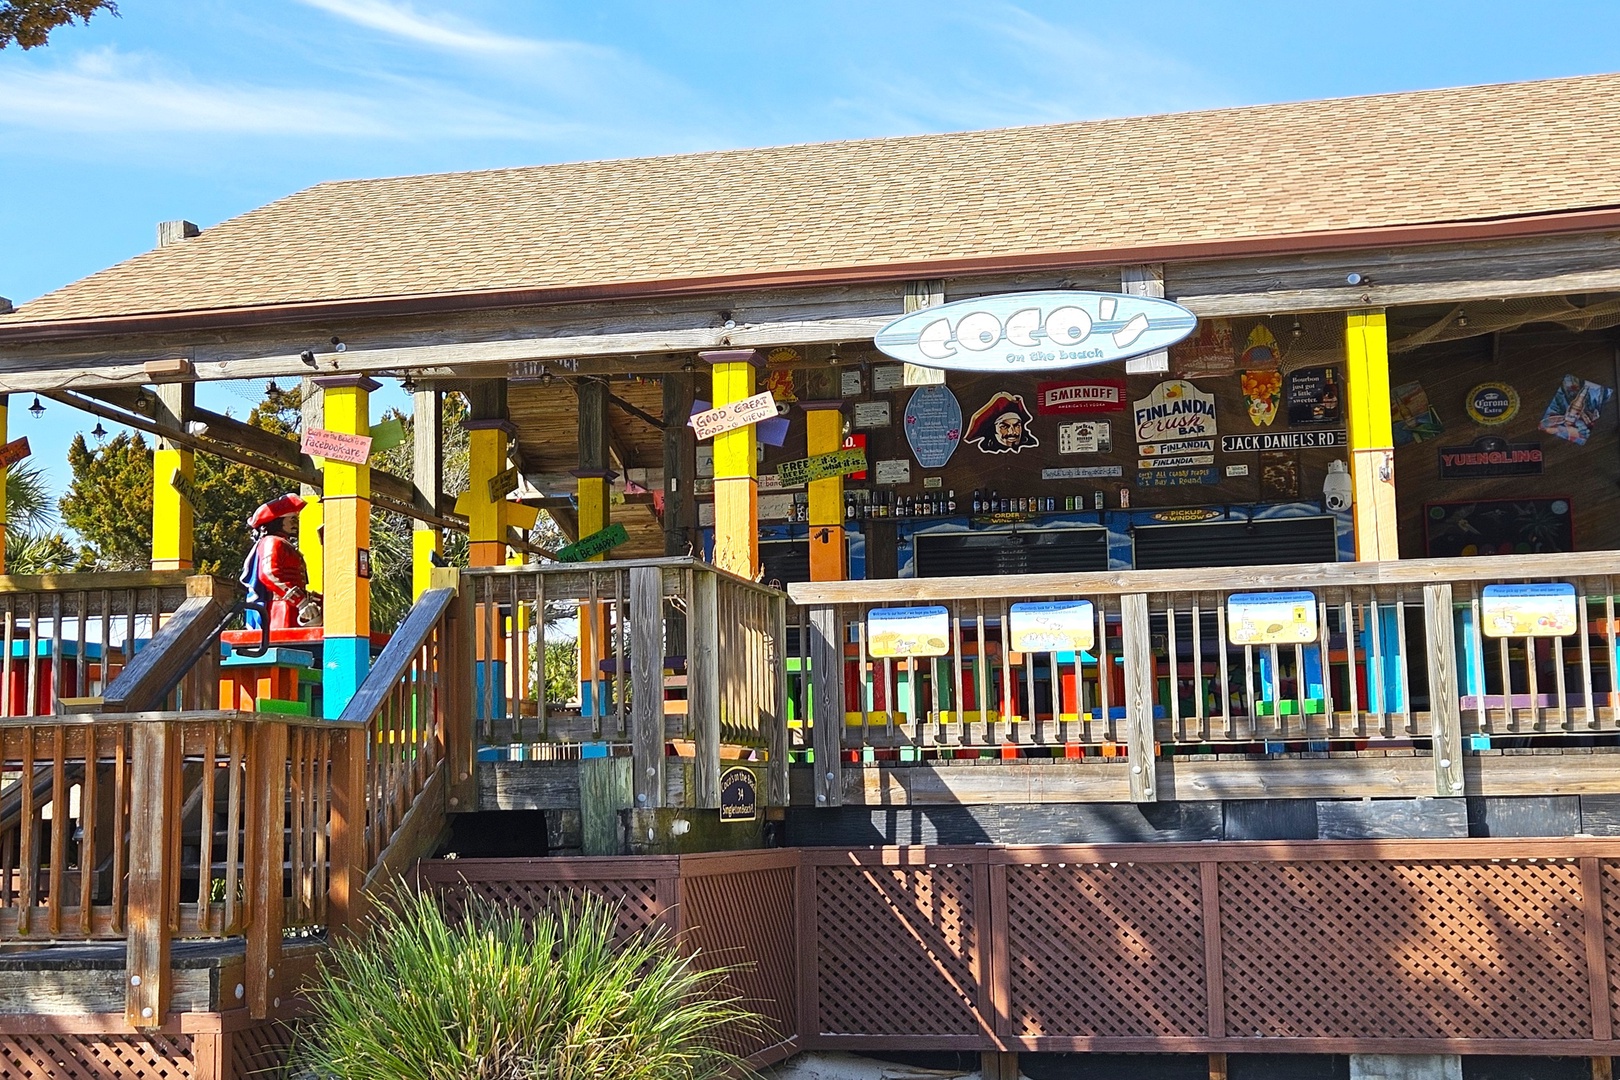 Coco's on the Beach is located just a short walk down the boardwalk